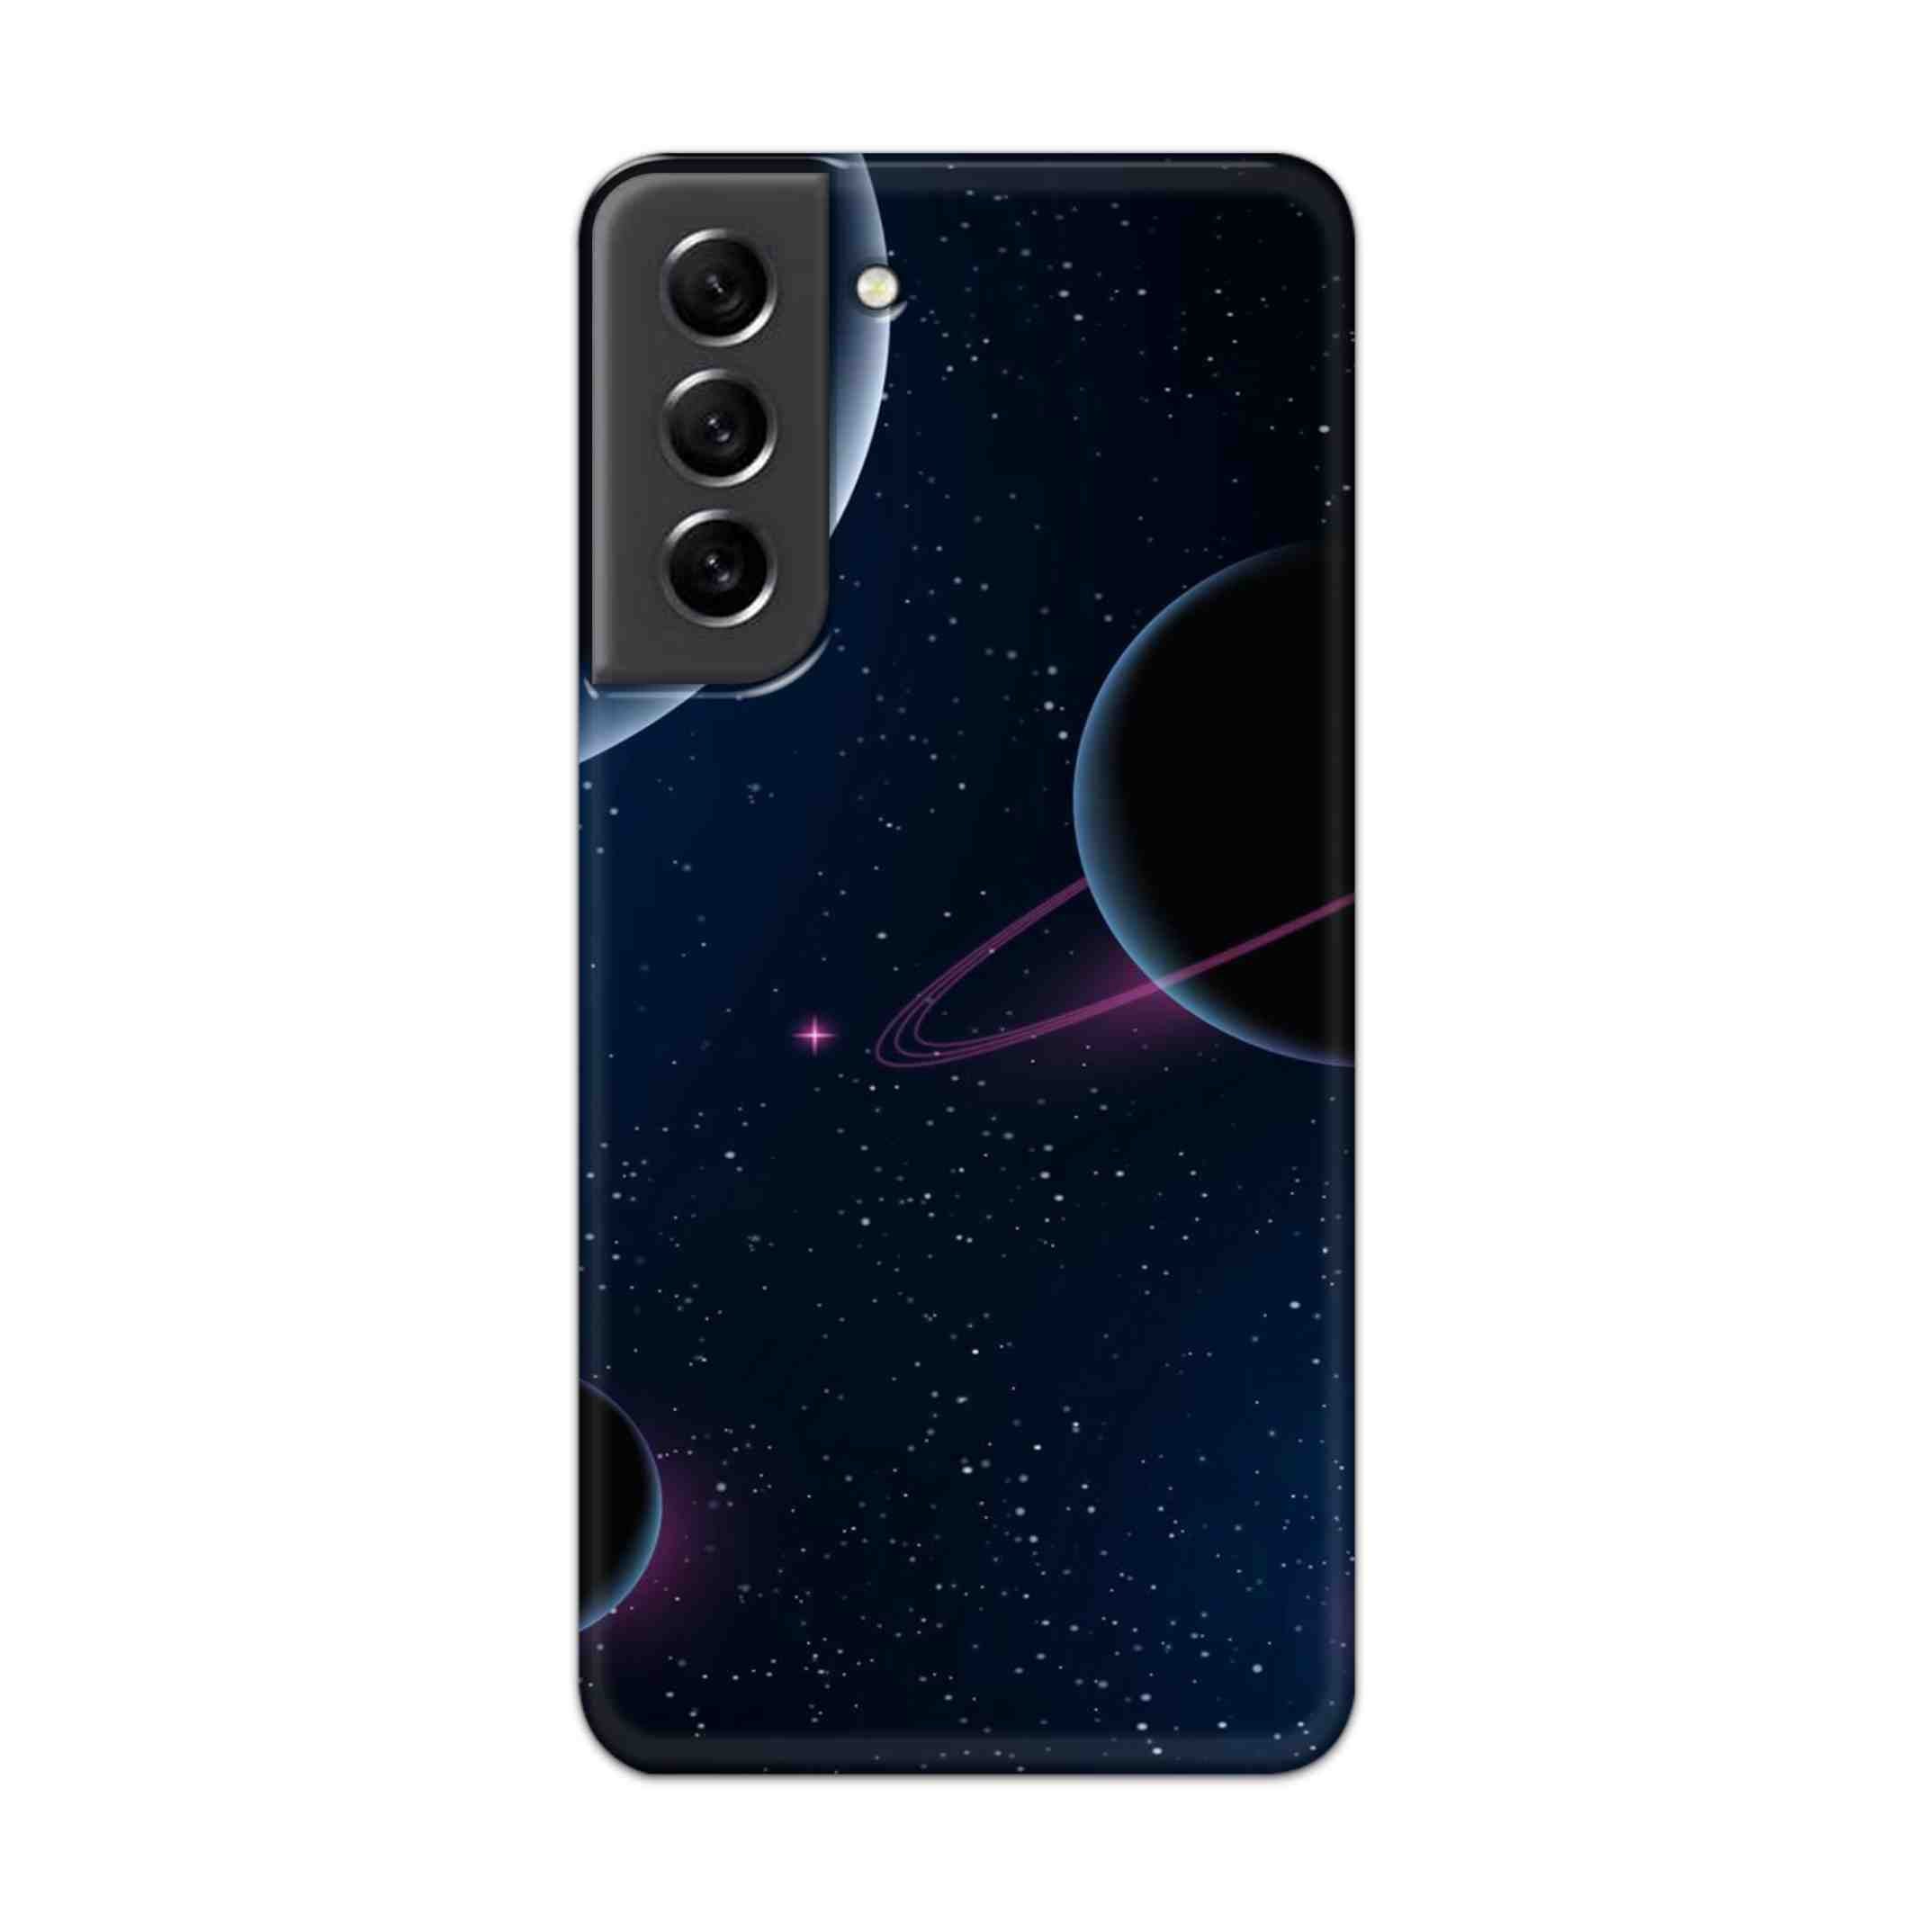 Buy Night Space Hard Back Mobile Phone Case Cover For Samsung S21 FE Online